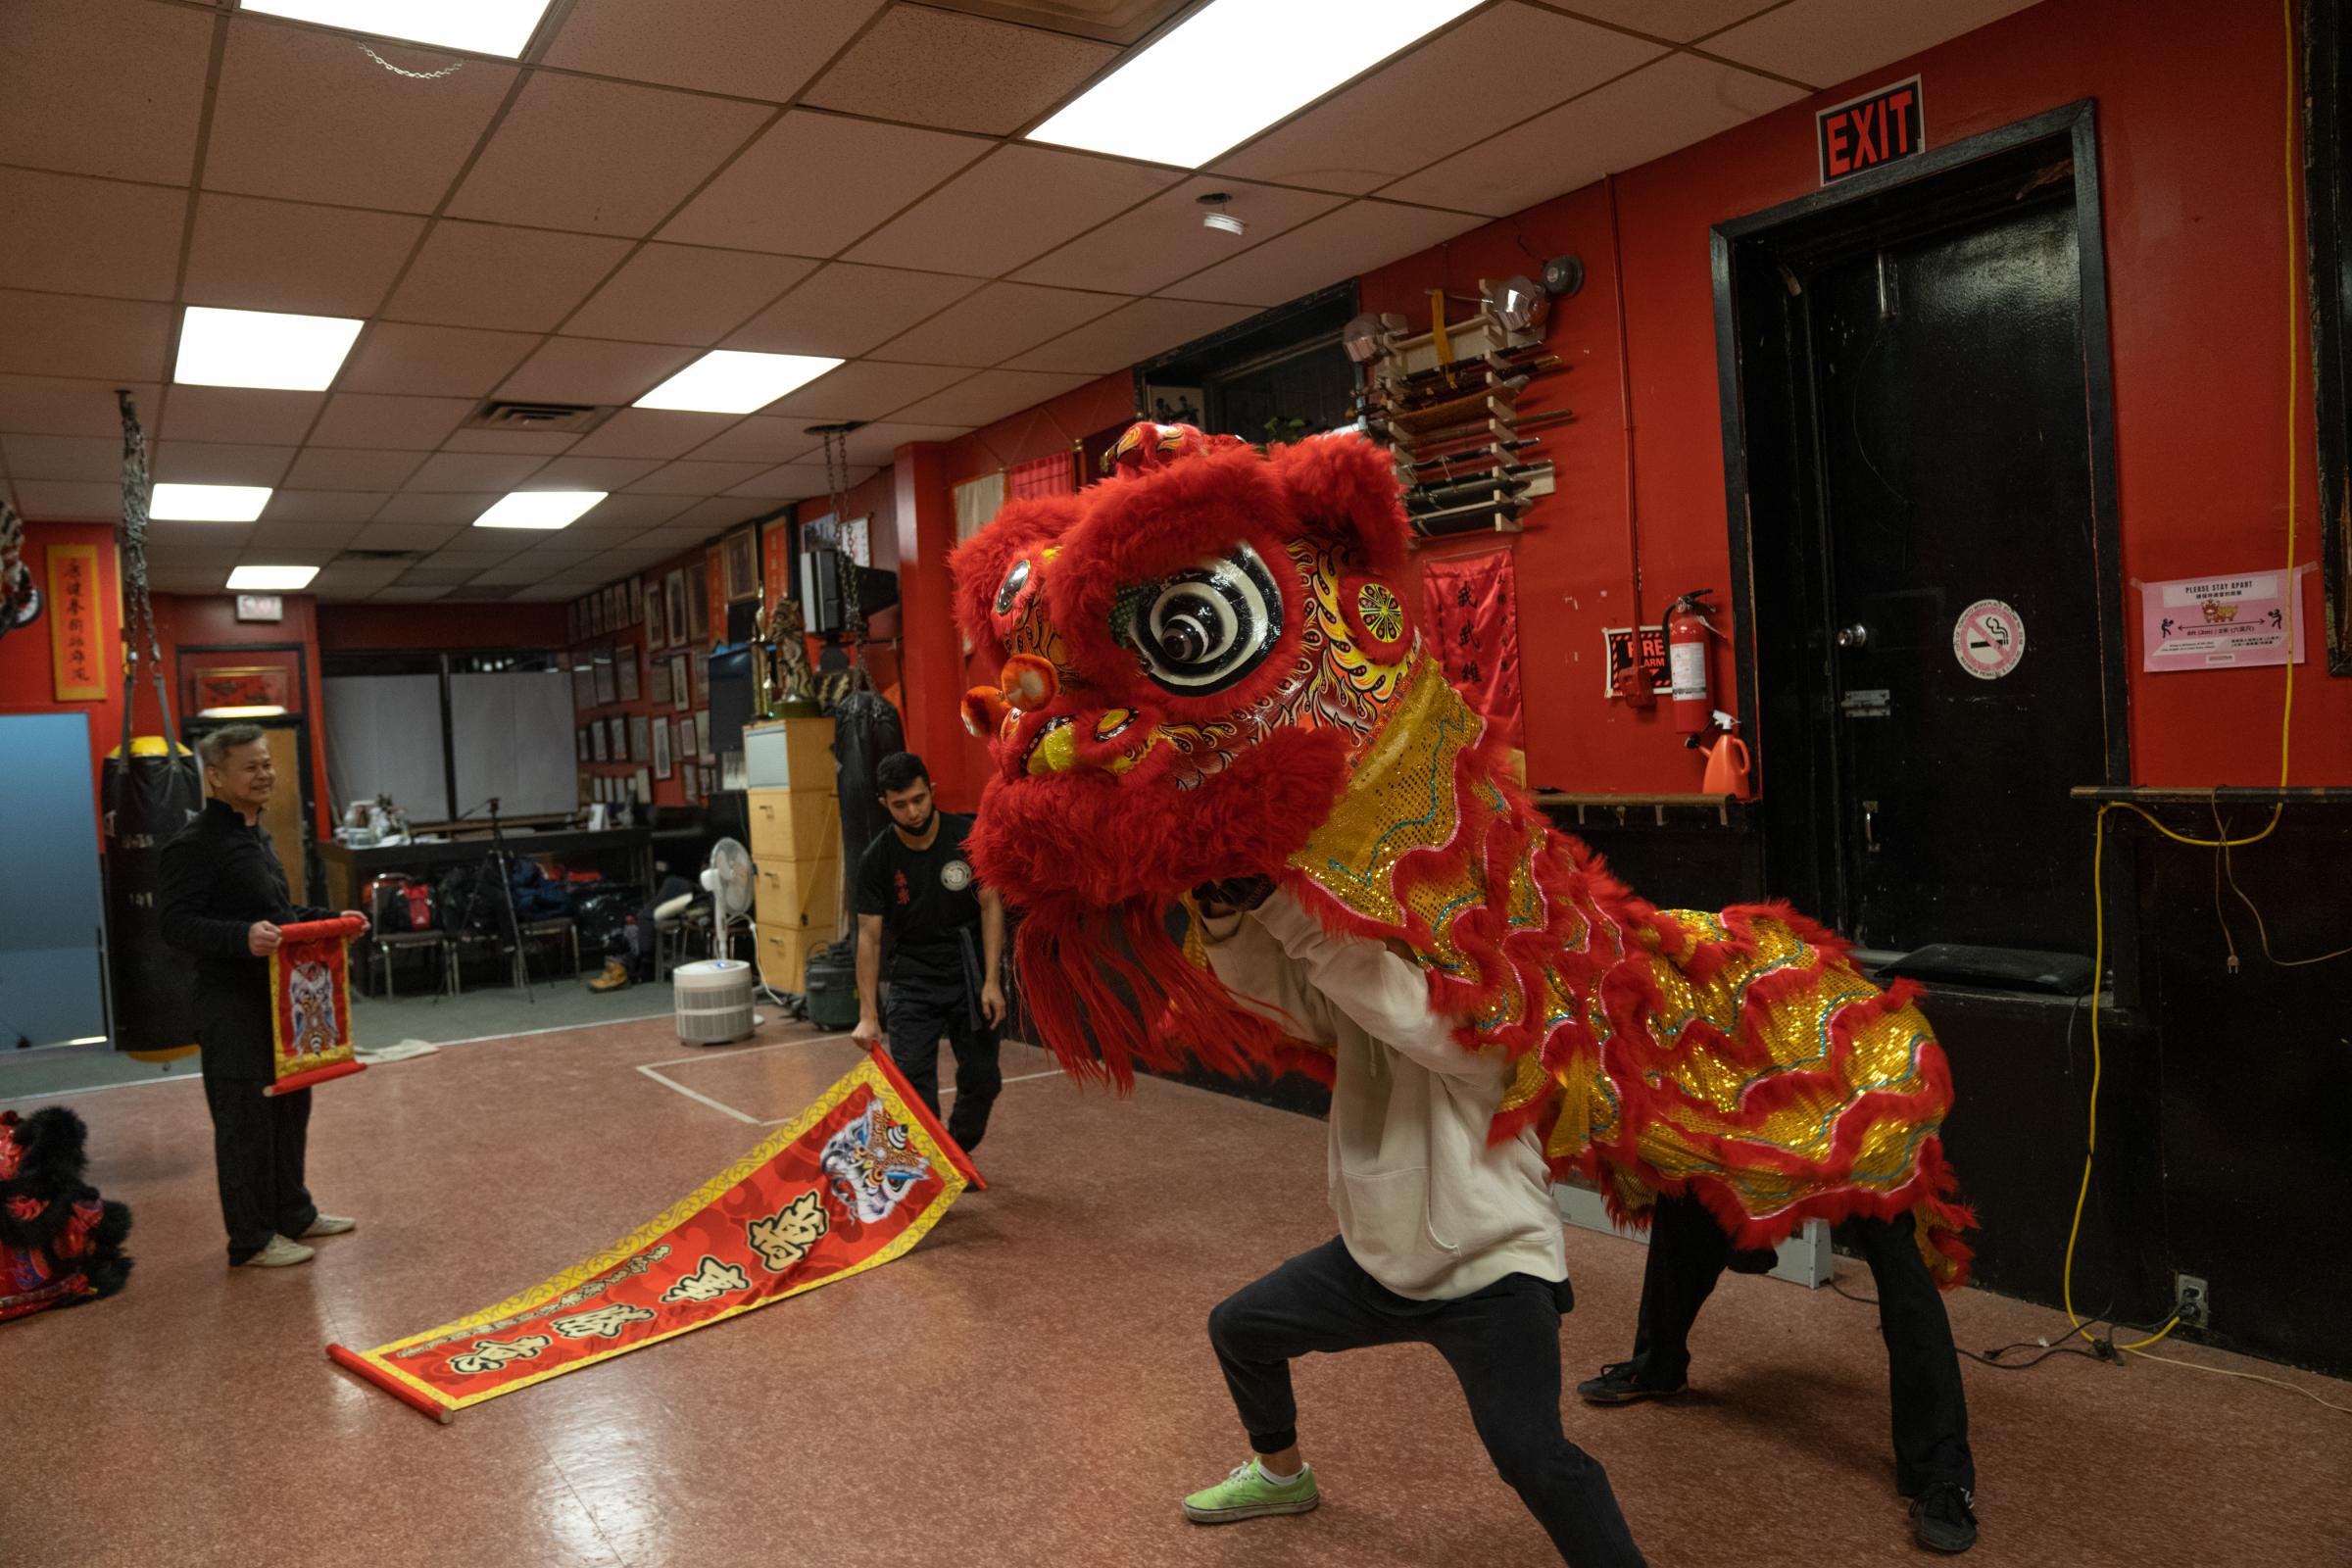 Members of the lion dance team at the Hong Luck Kung Fu Club using a golden and red lion during practice in preparation for the 2022 Lunar New Year...